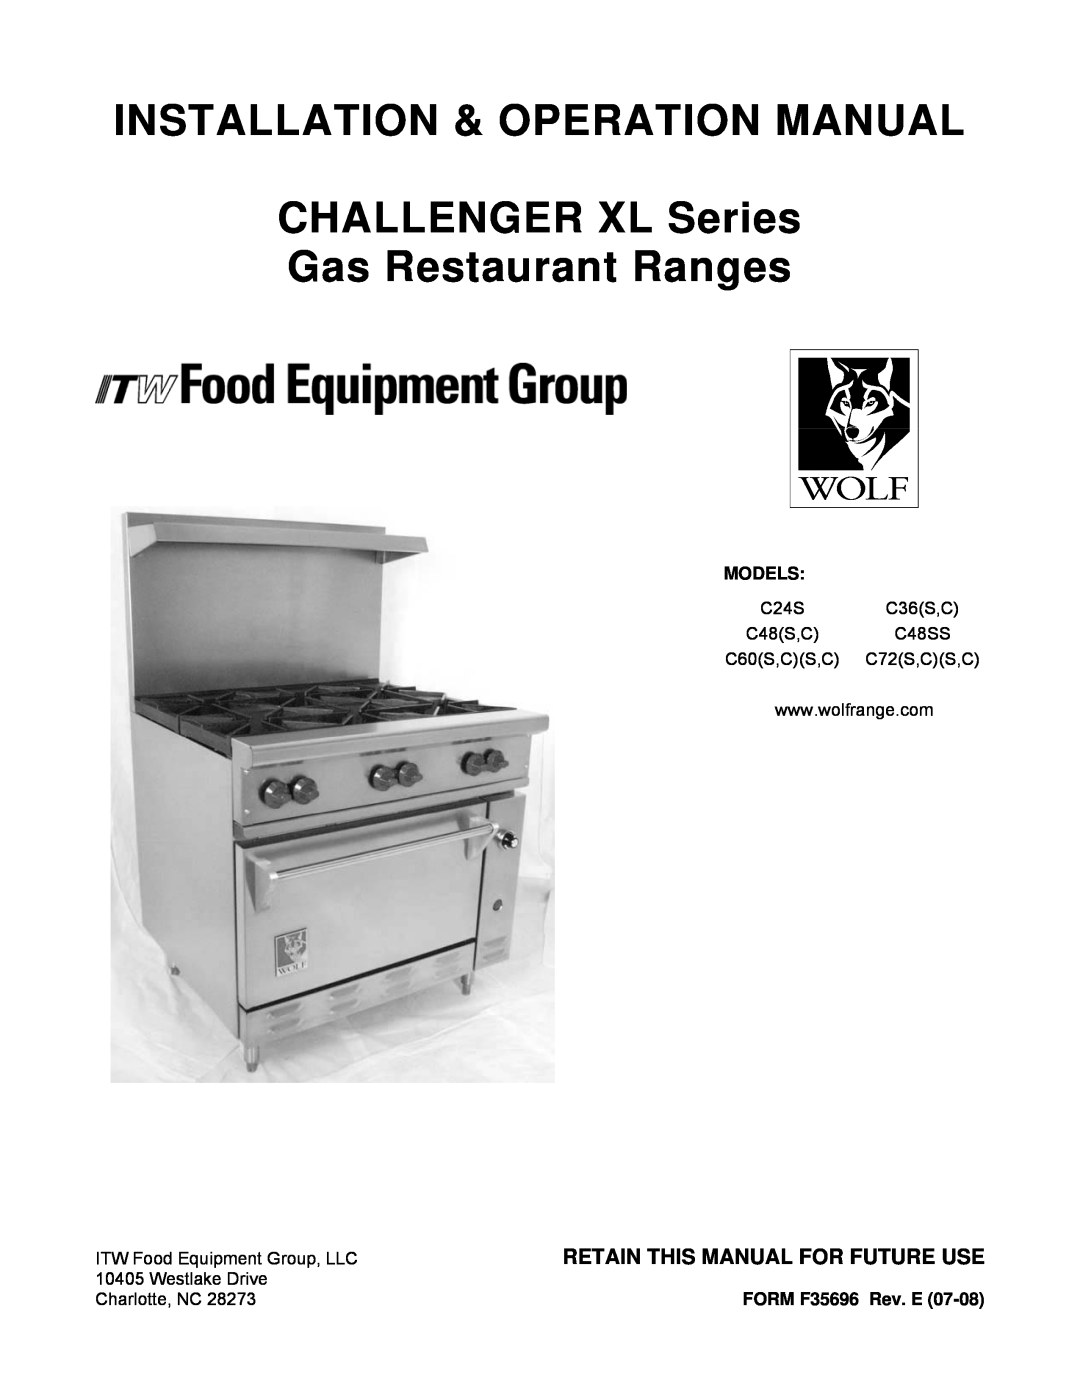 Wolf C36(S,C) operation manual INSTALLATION & OPERATION MANUAL CHALLENGER XL Series, Gas Restaurant Ranges, Models 